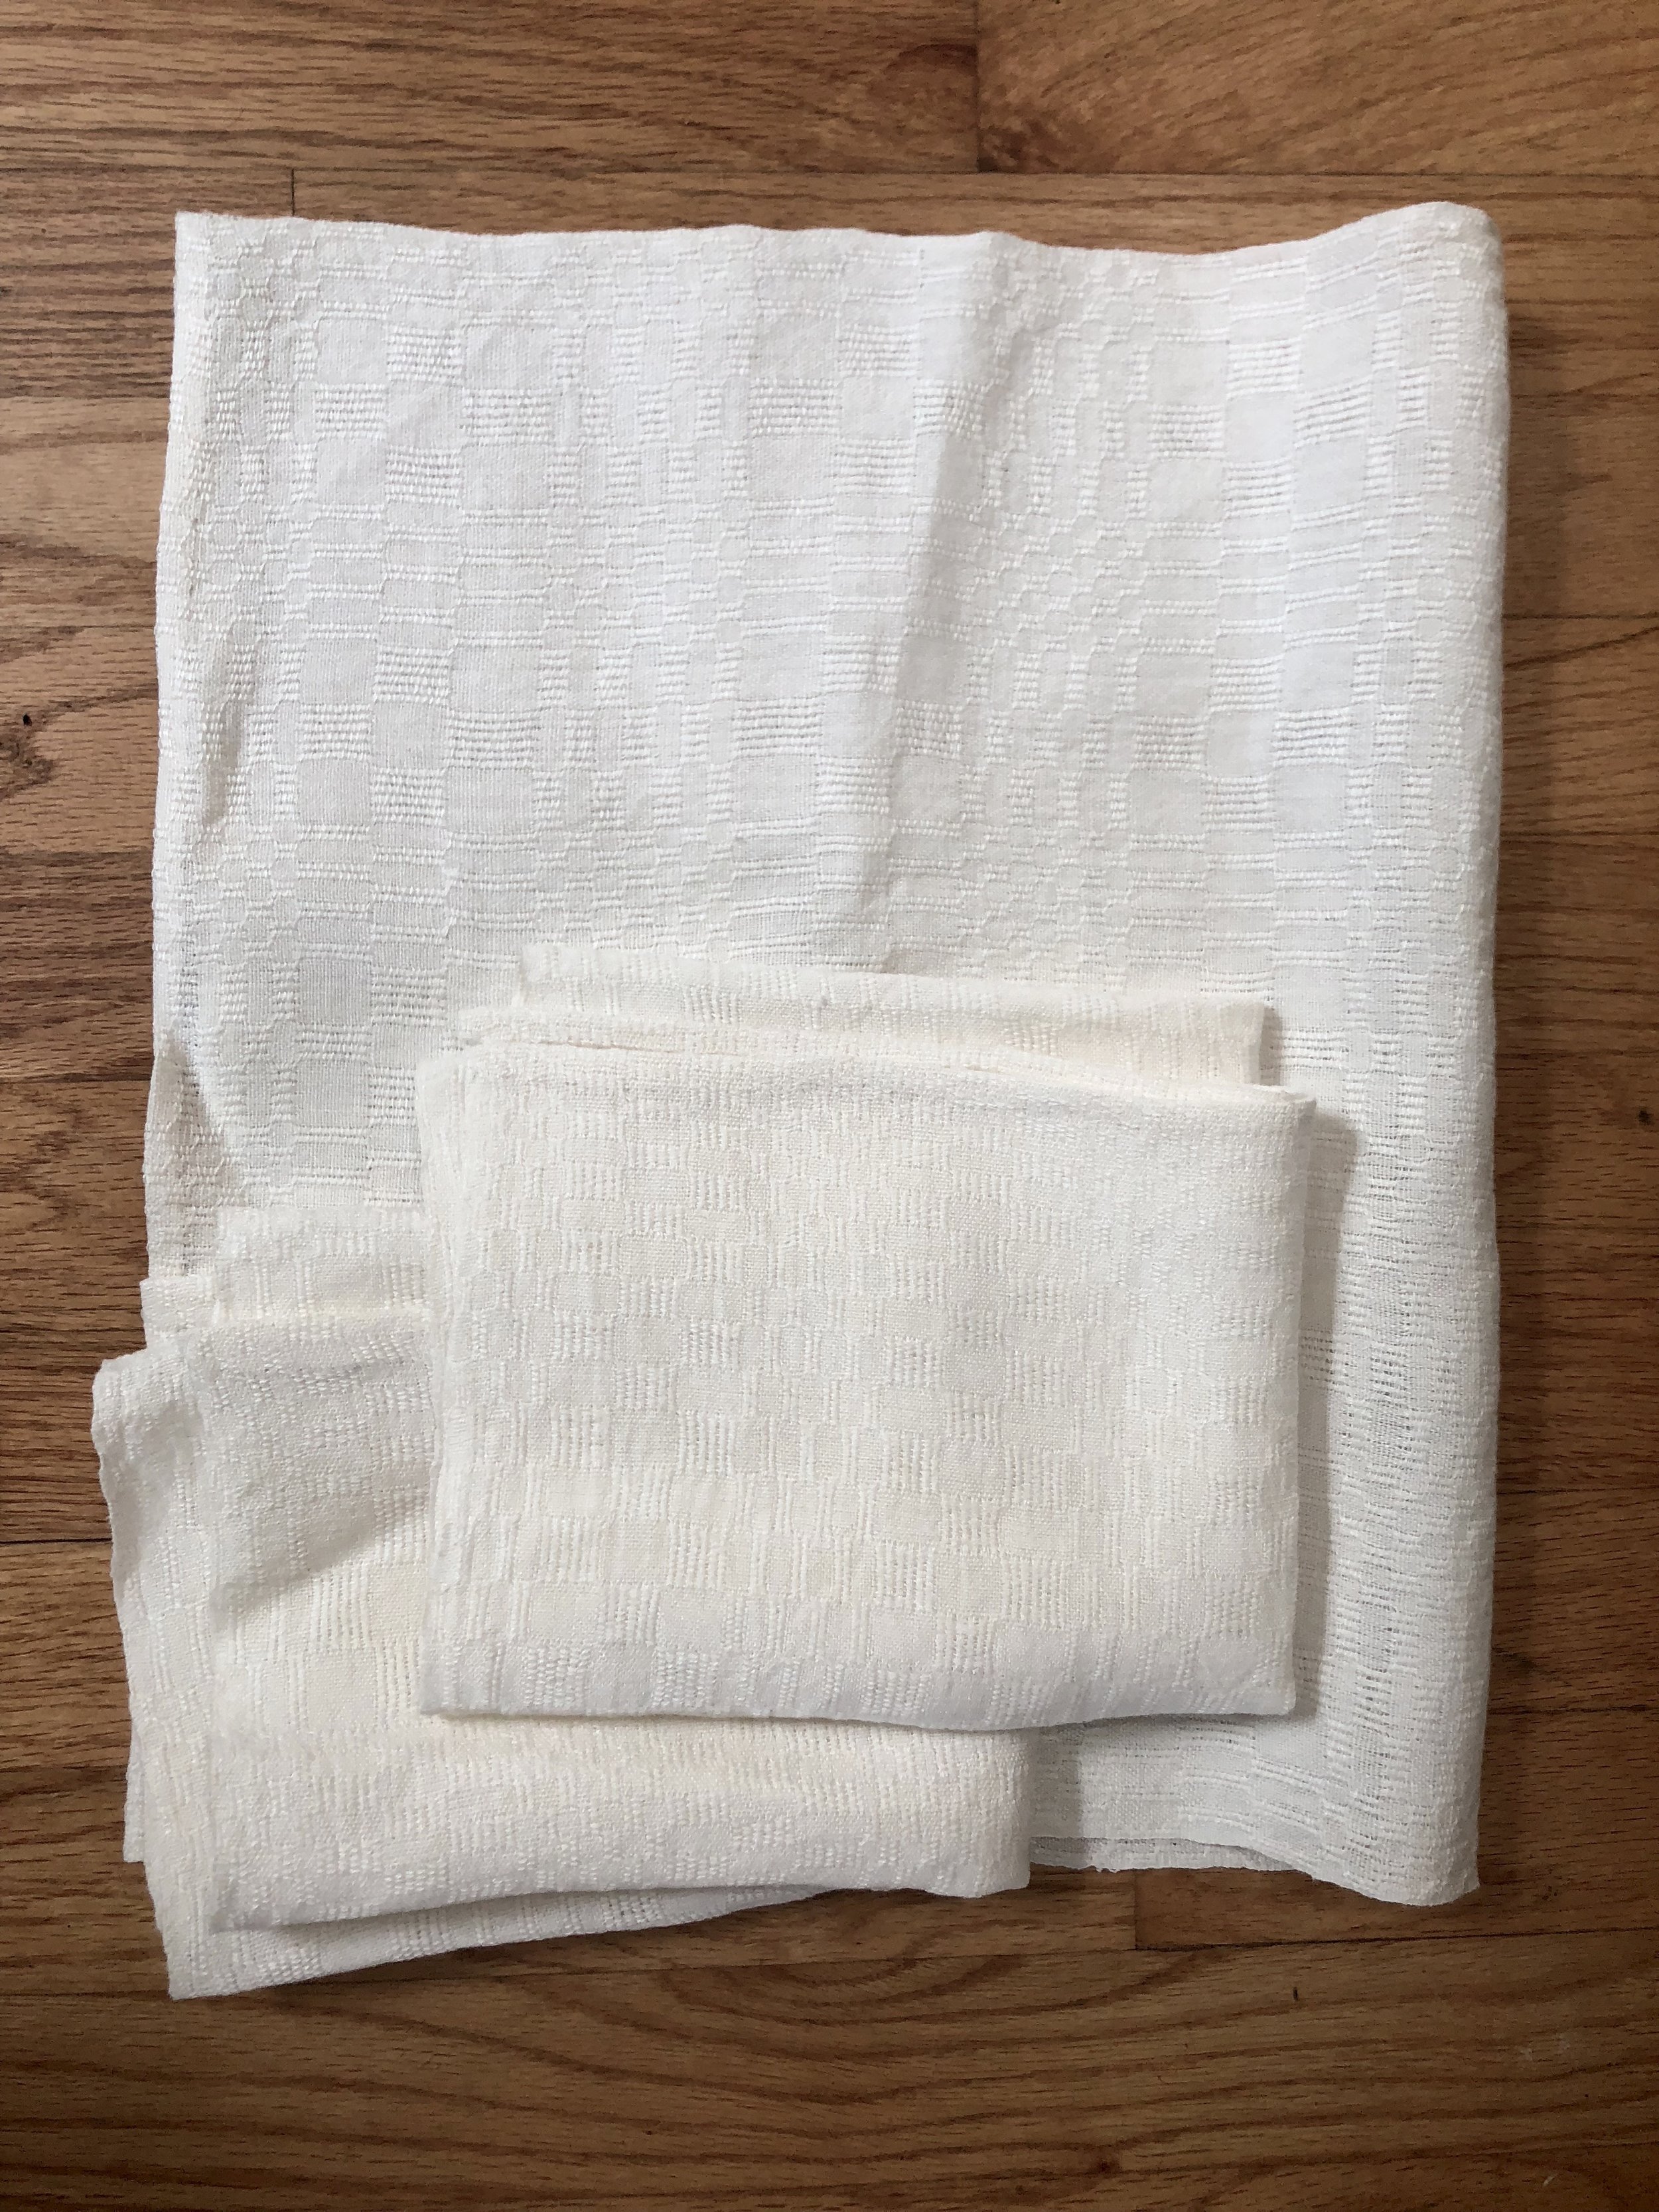  M’s and O’s towels, 2018. Linen. Each towel is about 16 1/2” x 26”. 